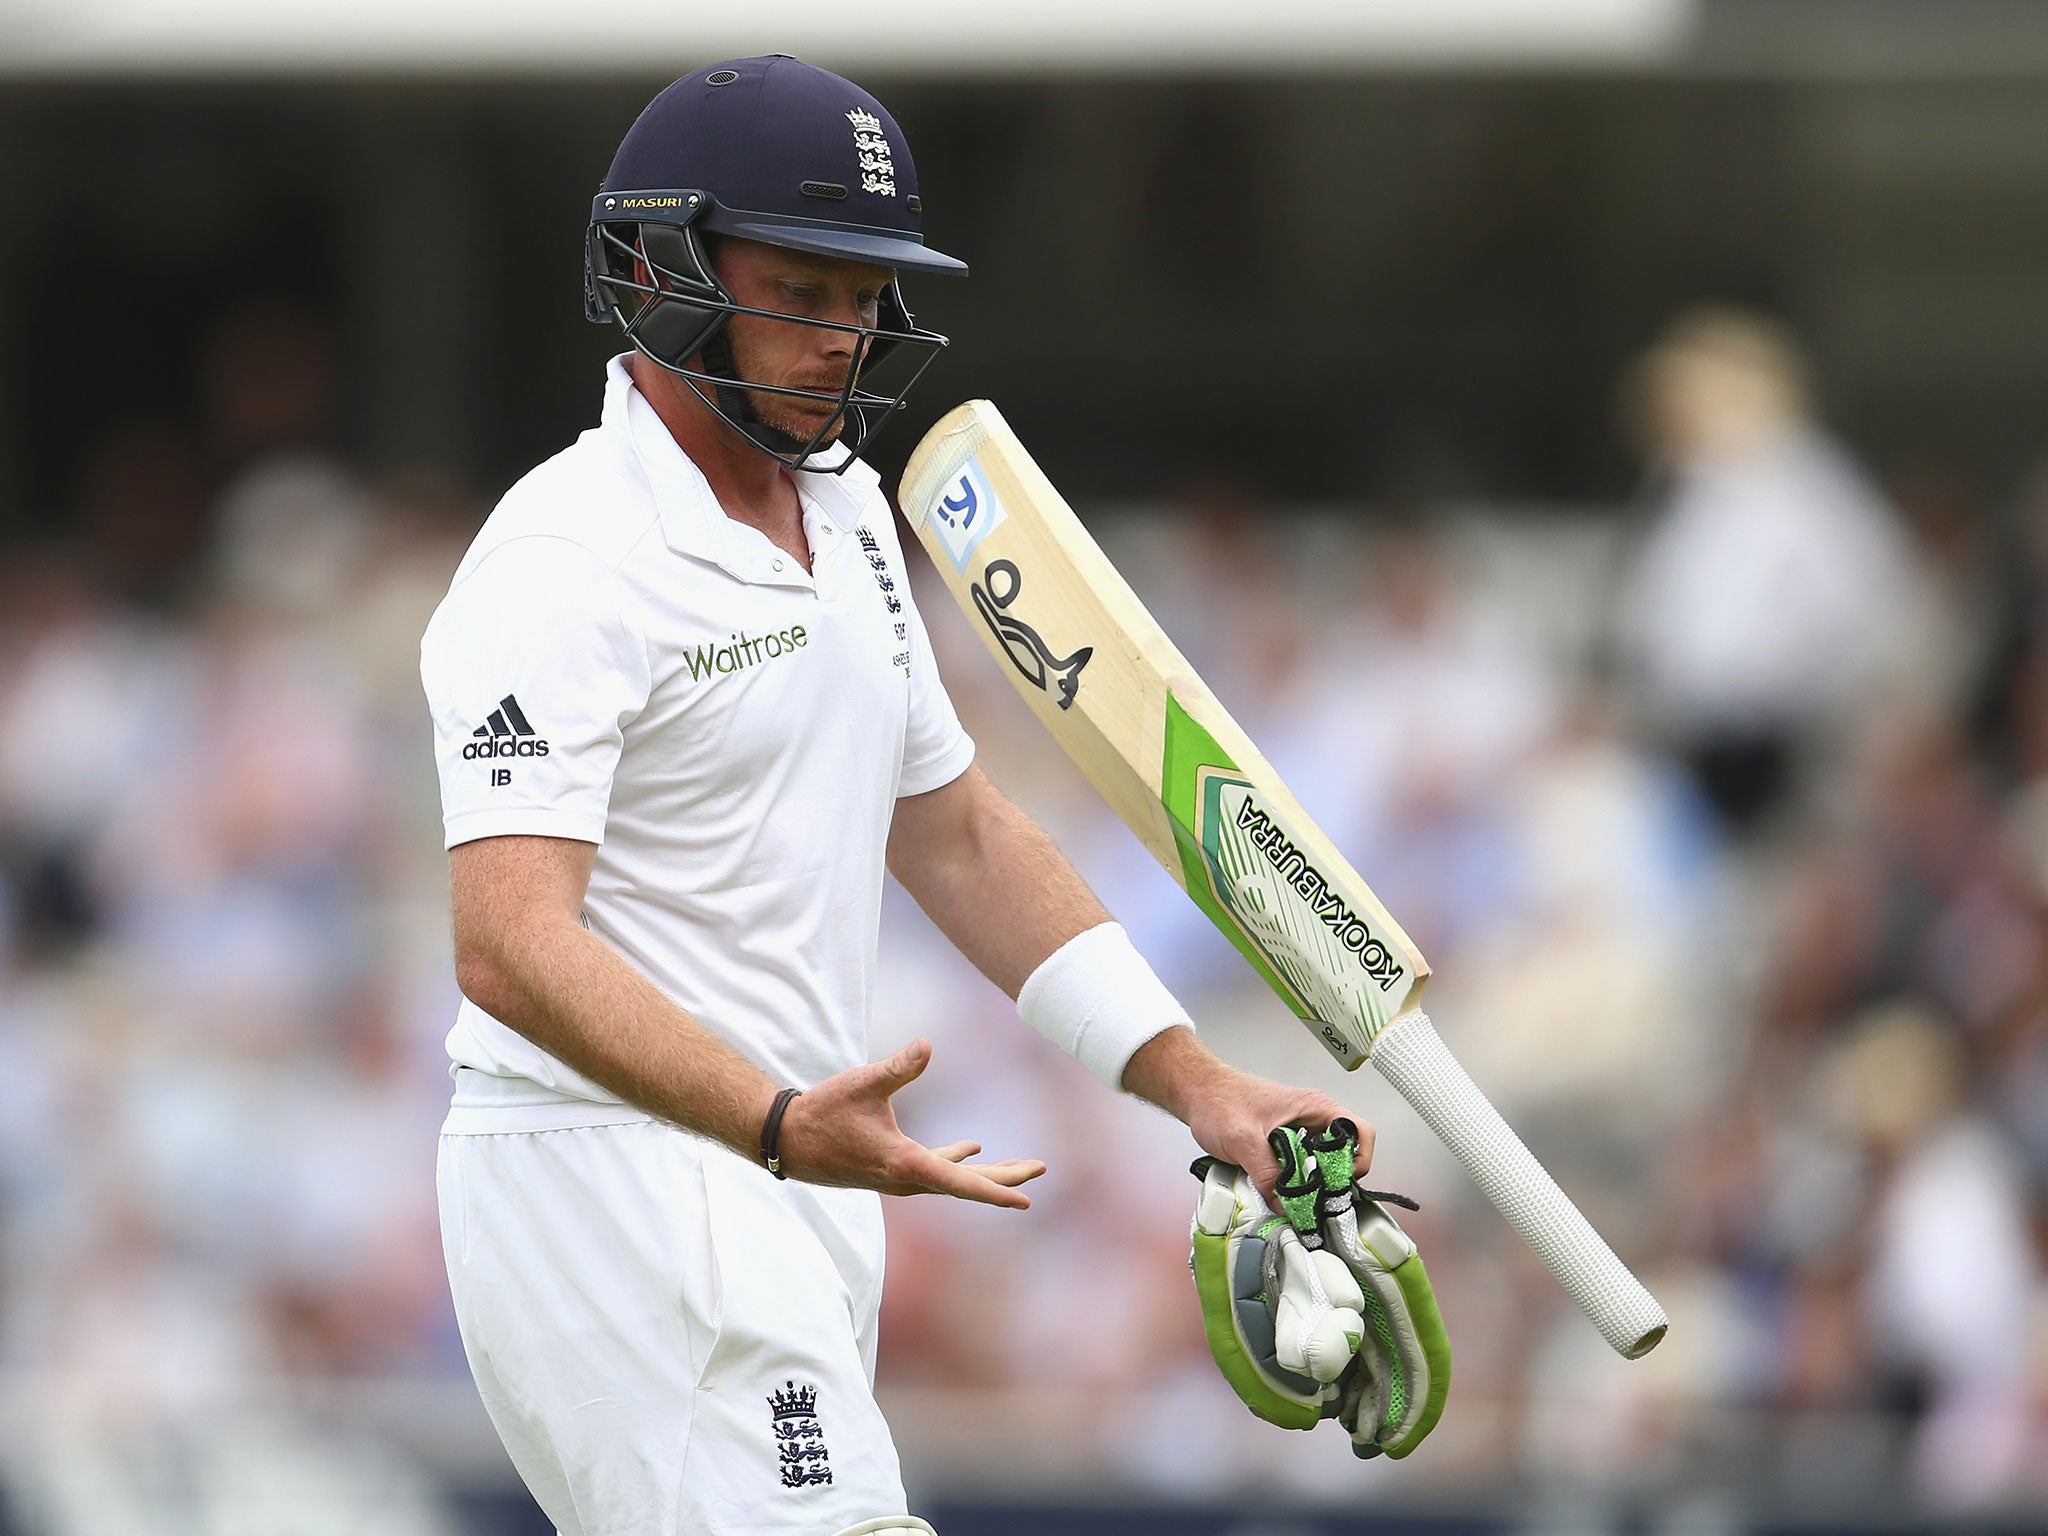 Ian Bell has never scored a century for England on his home county ground of Edgbaston